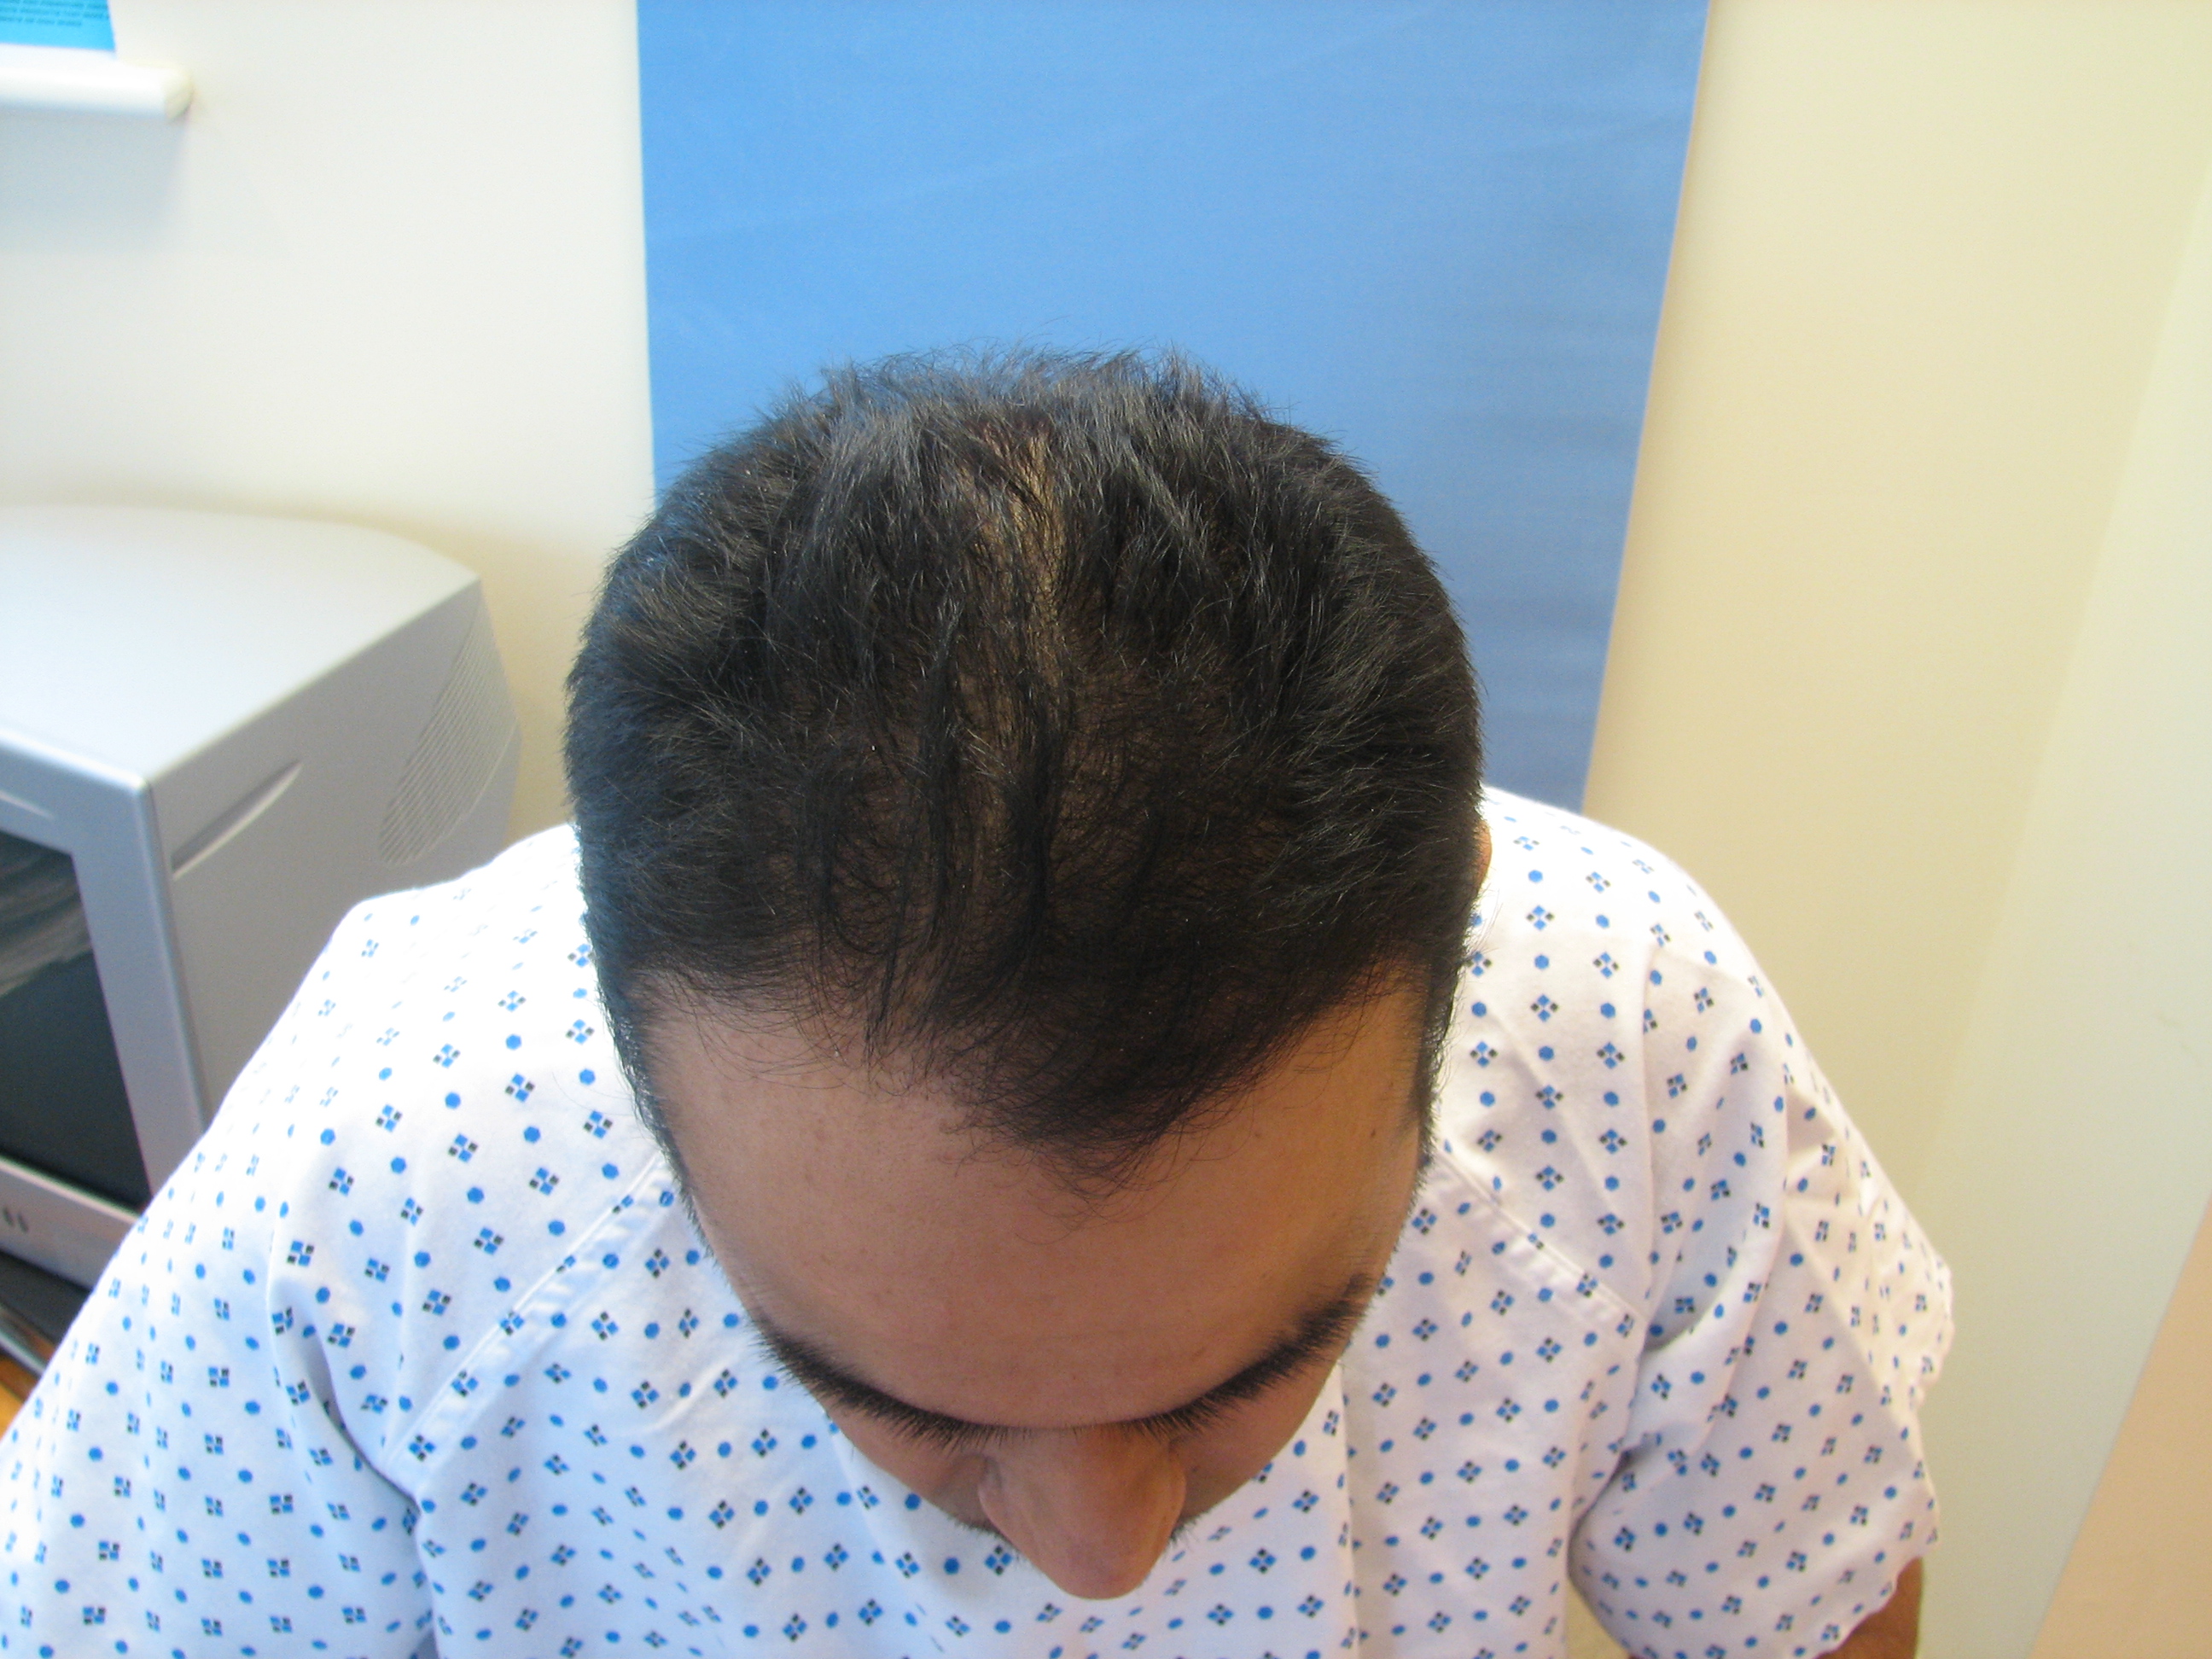 34 HQ Photos Asian Hair Transplant - This 33 Year Old Asian Female Is Shown Before And 10 Months After A Female Hairline Lowering To Improv Hair Transplant Women Frontal Hairstyles Hair Transplant